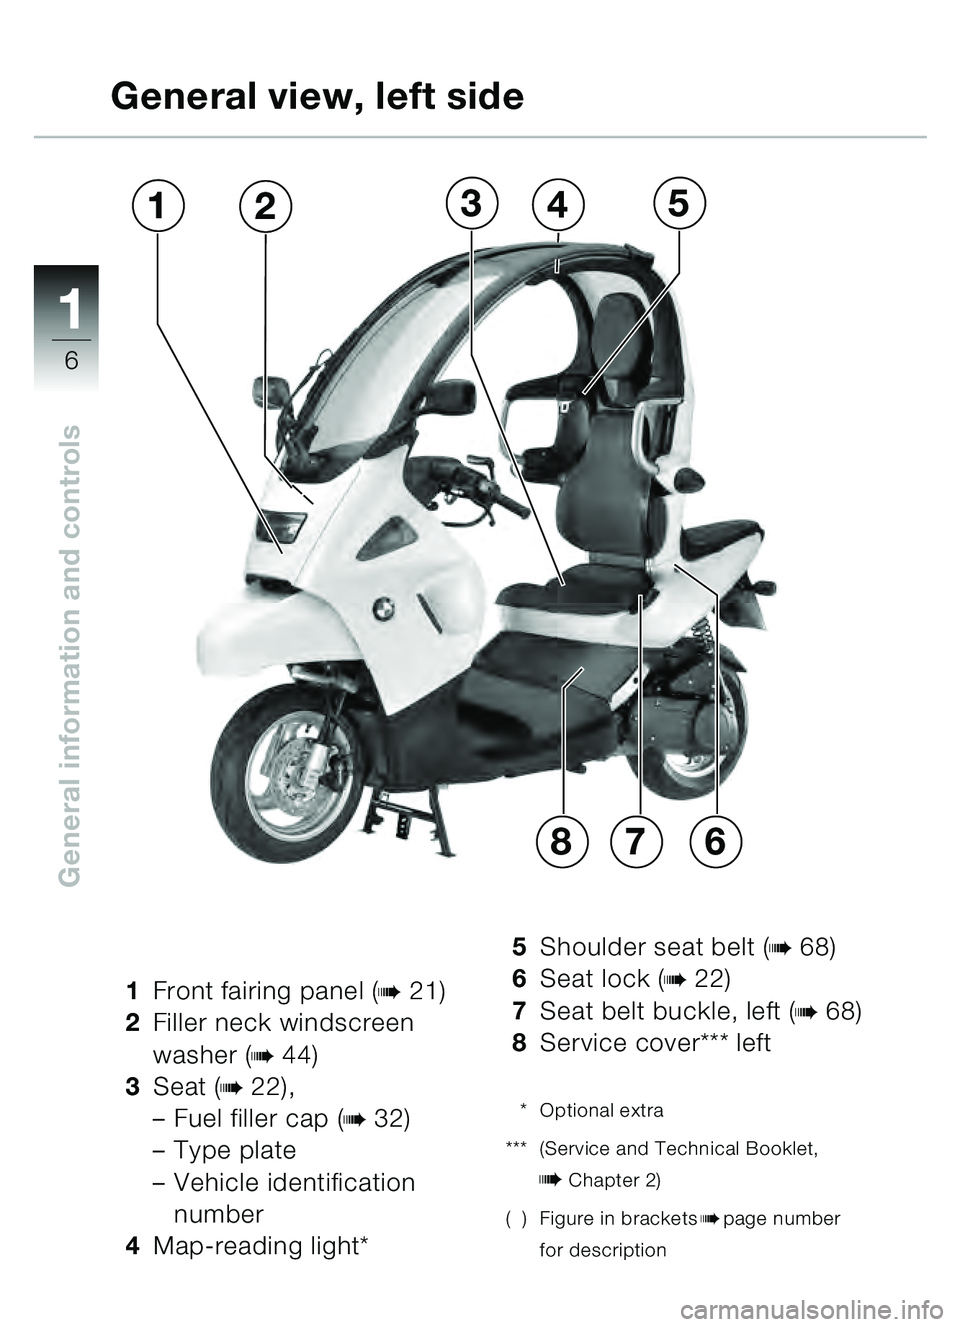 BMW MOTORRAD C1 2000  Riders Manual (in English) 11
6
General information and controls
General view, left side
1Front fairing panel (b21)
2 Filler neck windscreen 
washer (
b44)
3 Seat (
b22),
– Fuel filler cap (
b32)
–Type plate
– Vehicle ide